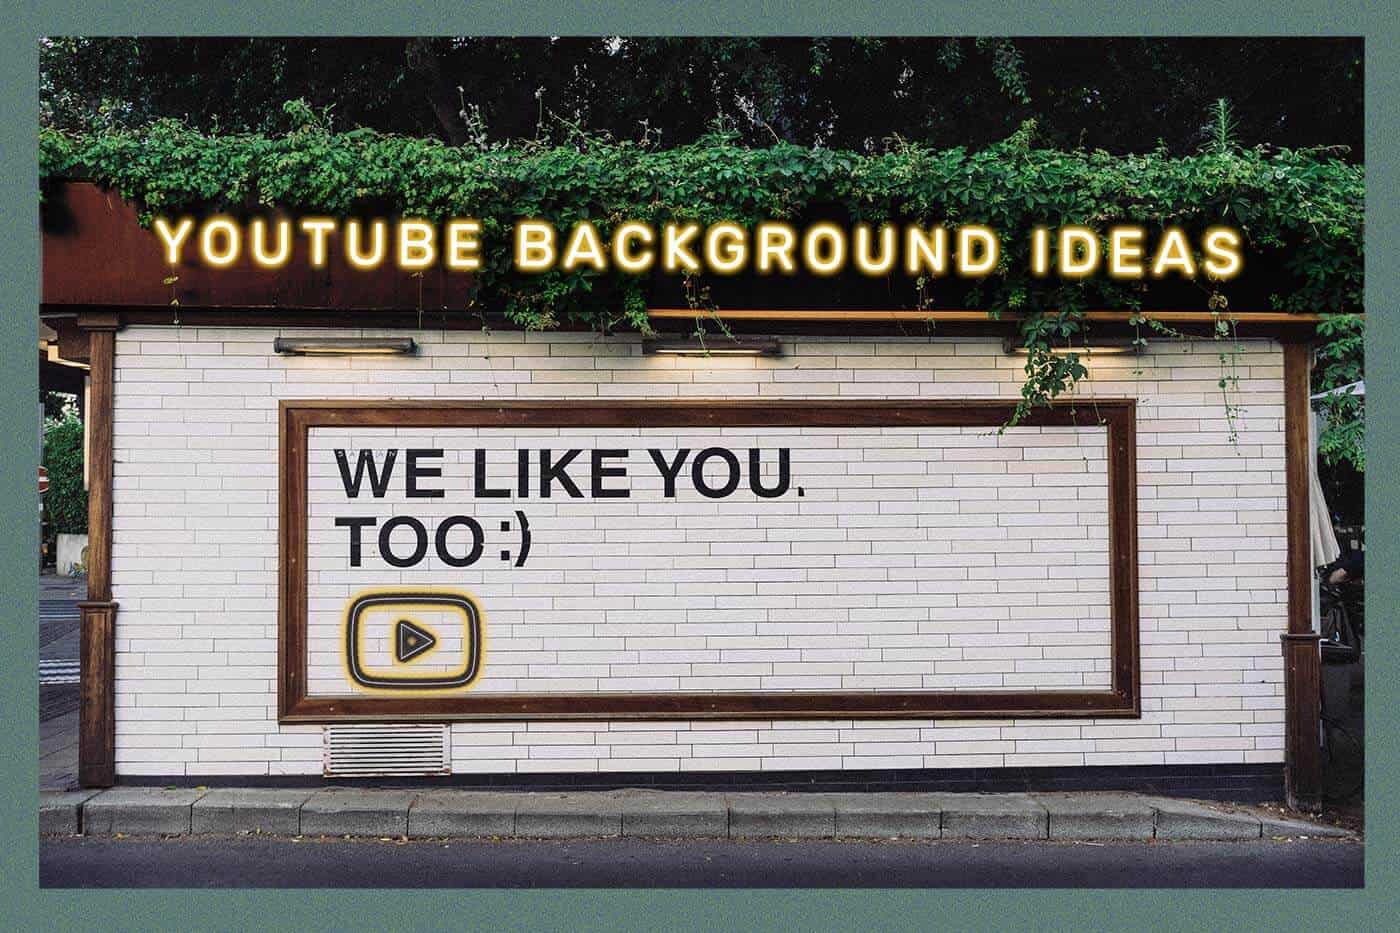 Best 15 YouTube Background Ideas Based on the Audience Niche [2022] |  SongLifty